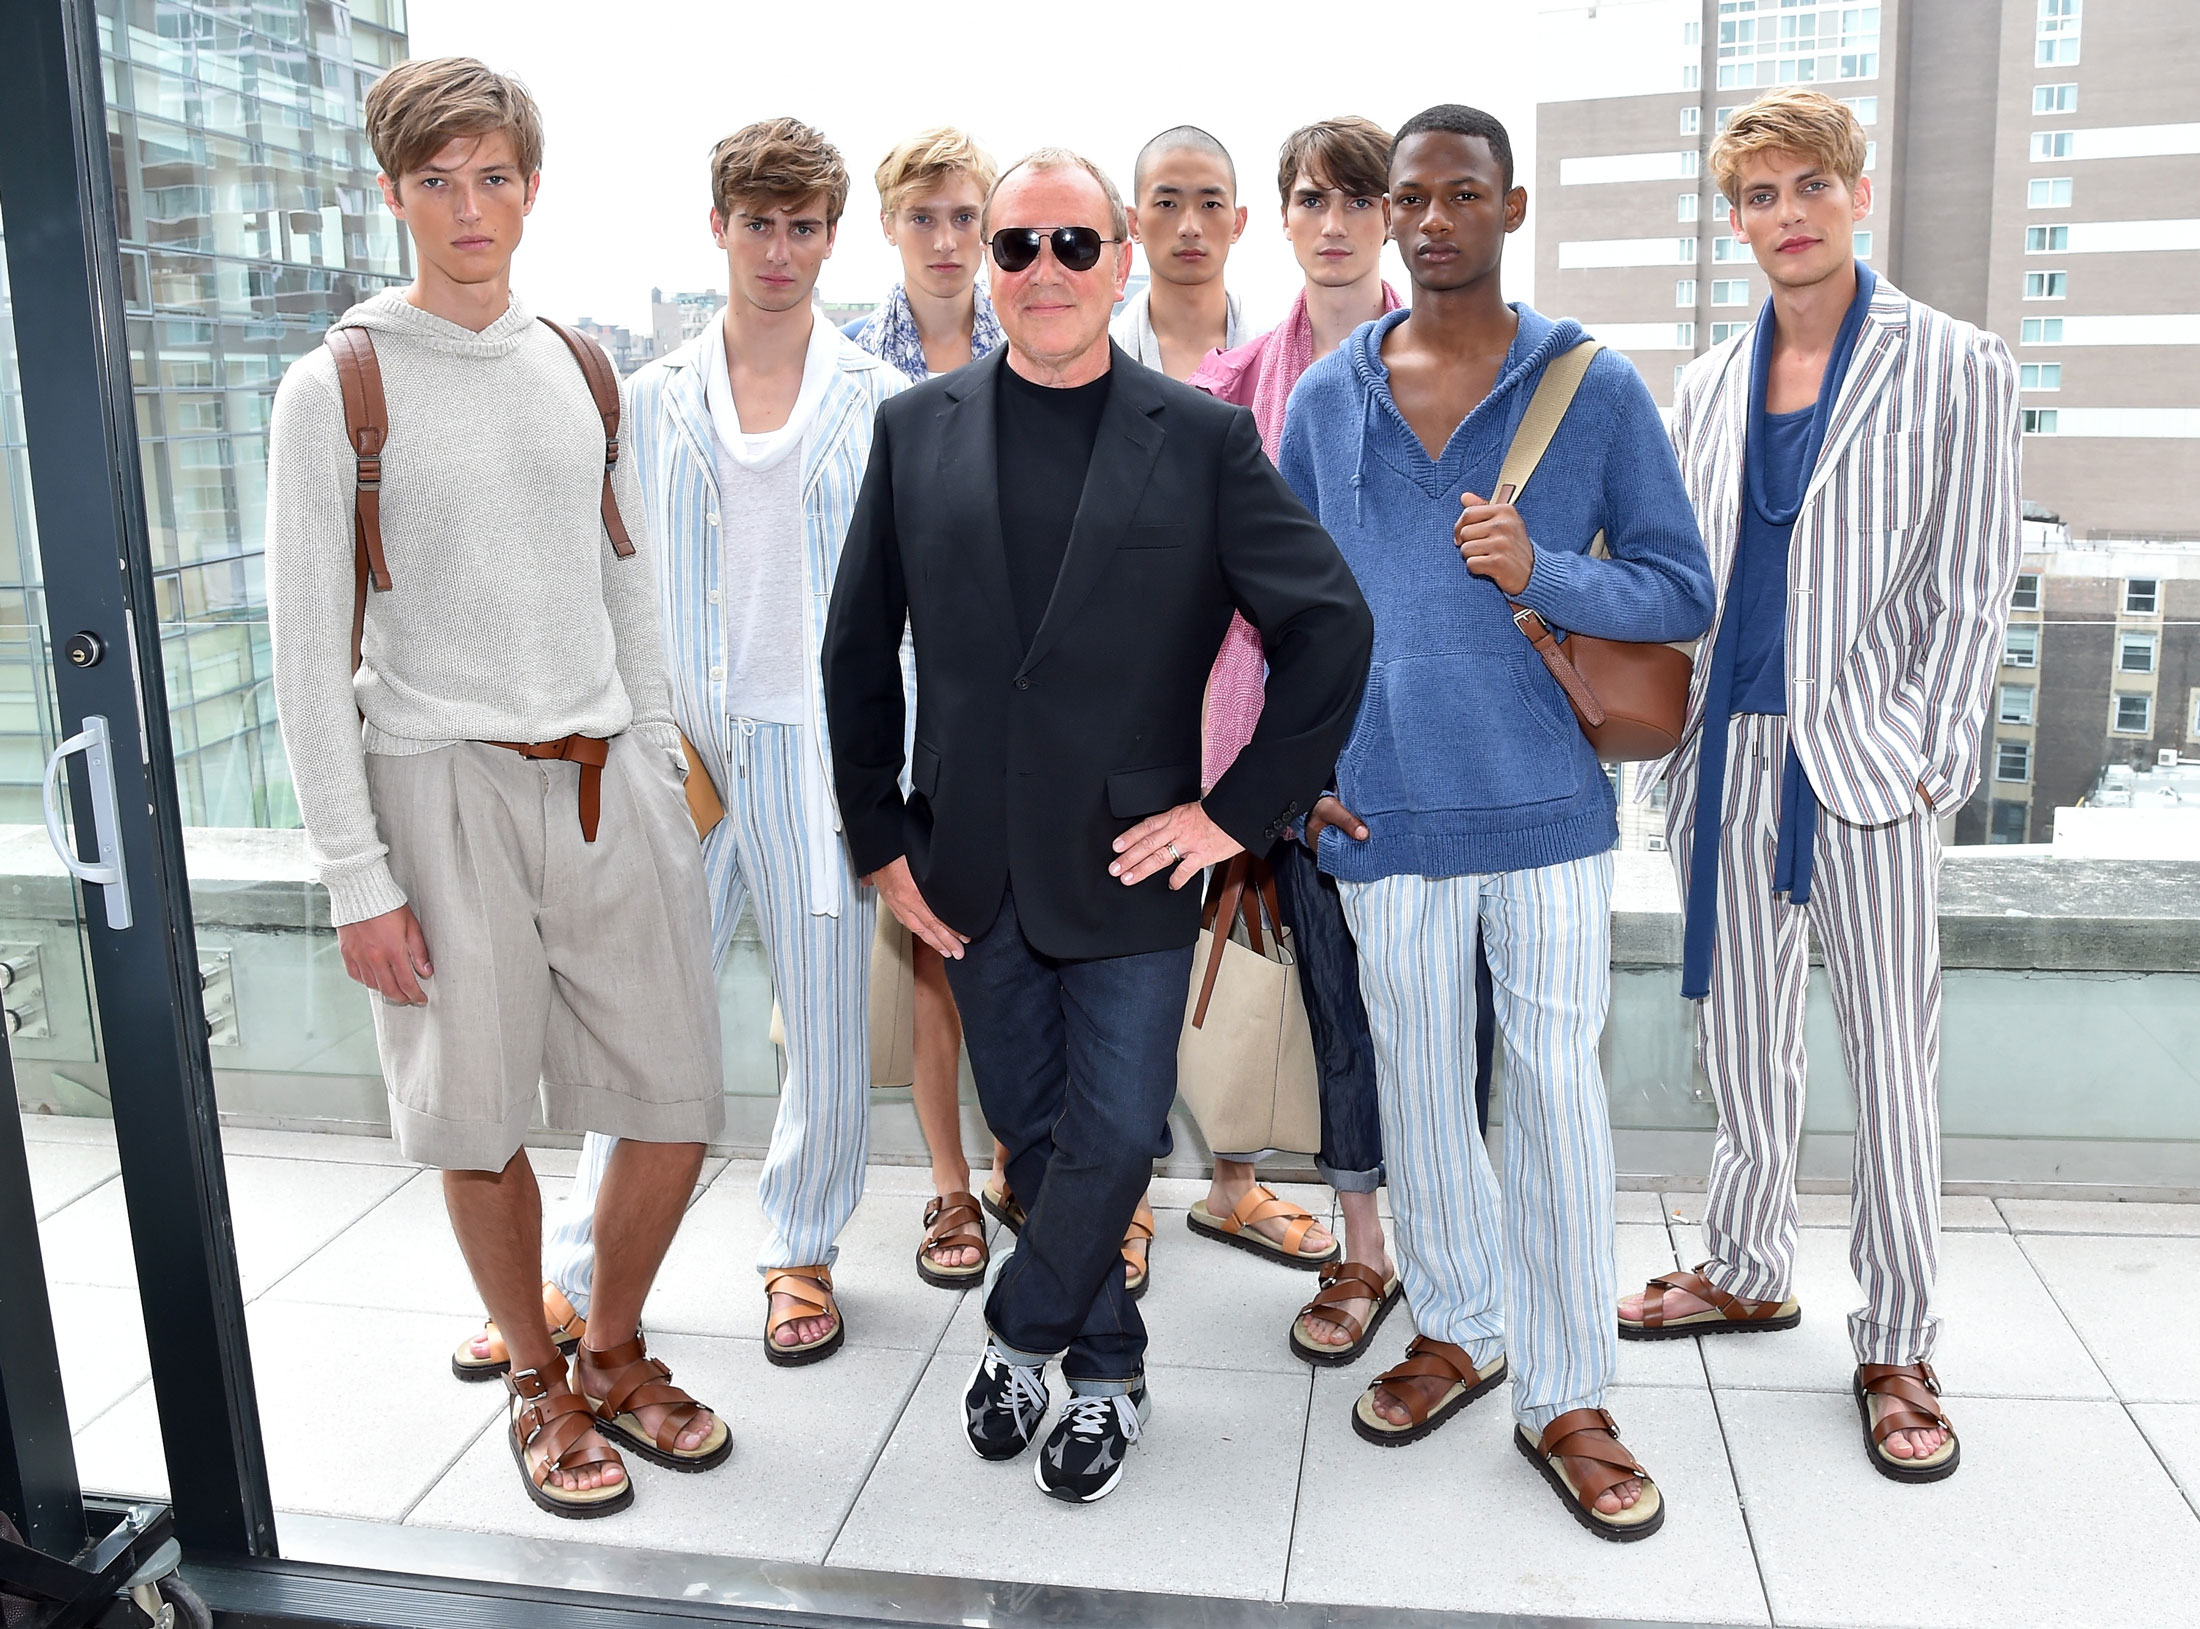 Michael Kors announces plans to open Men's store in Moscow this month